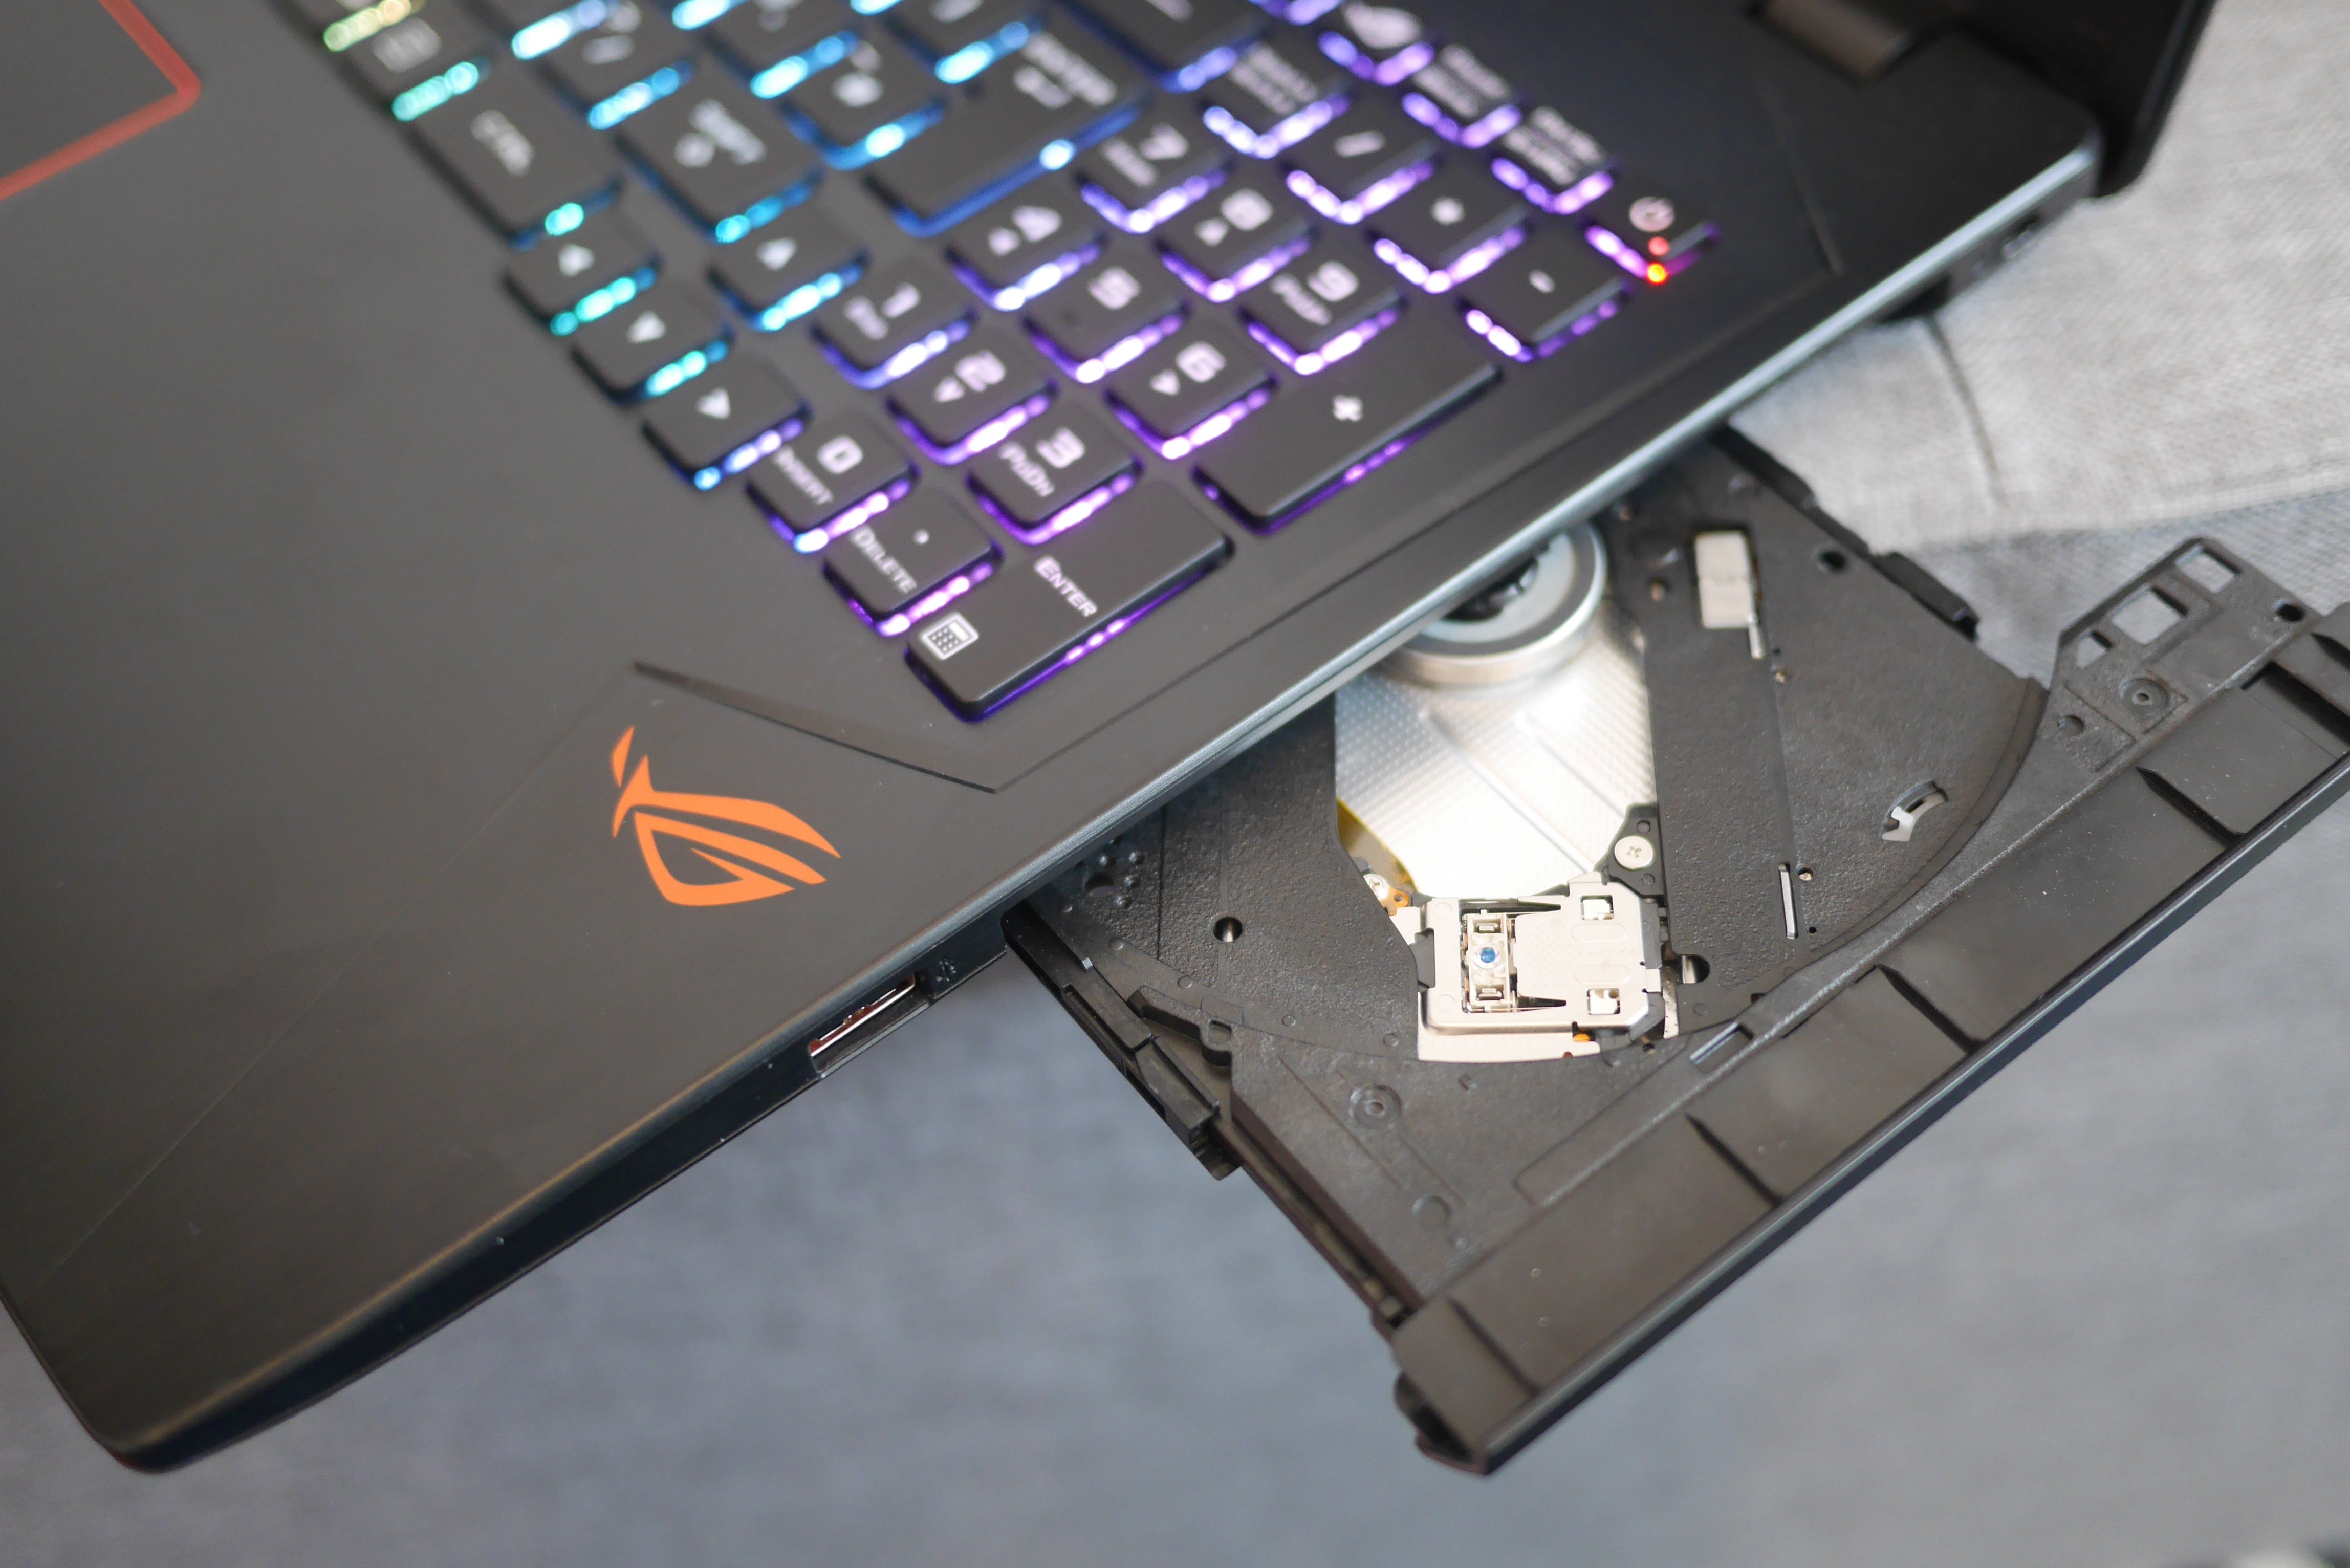 Asus ROG STRIX GL553 laptop with open optical drive.